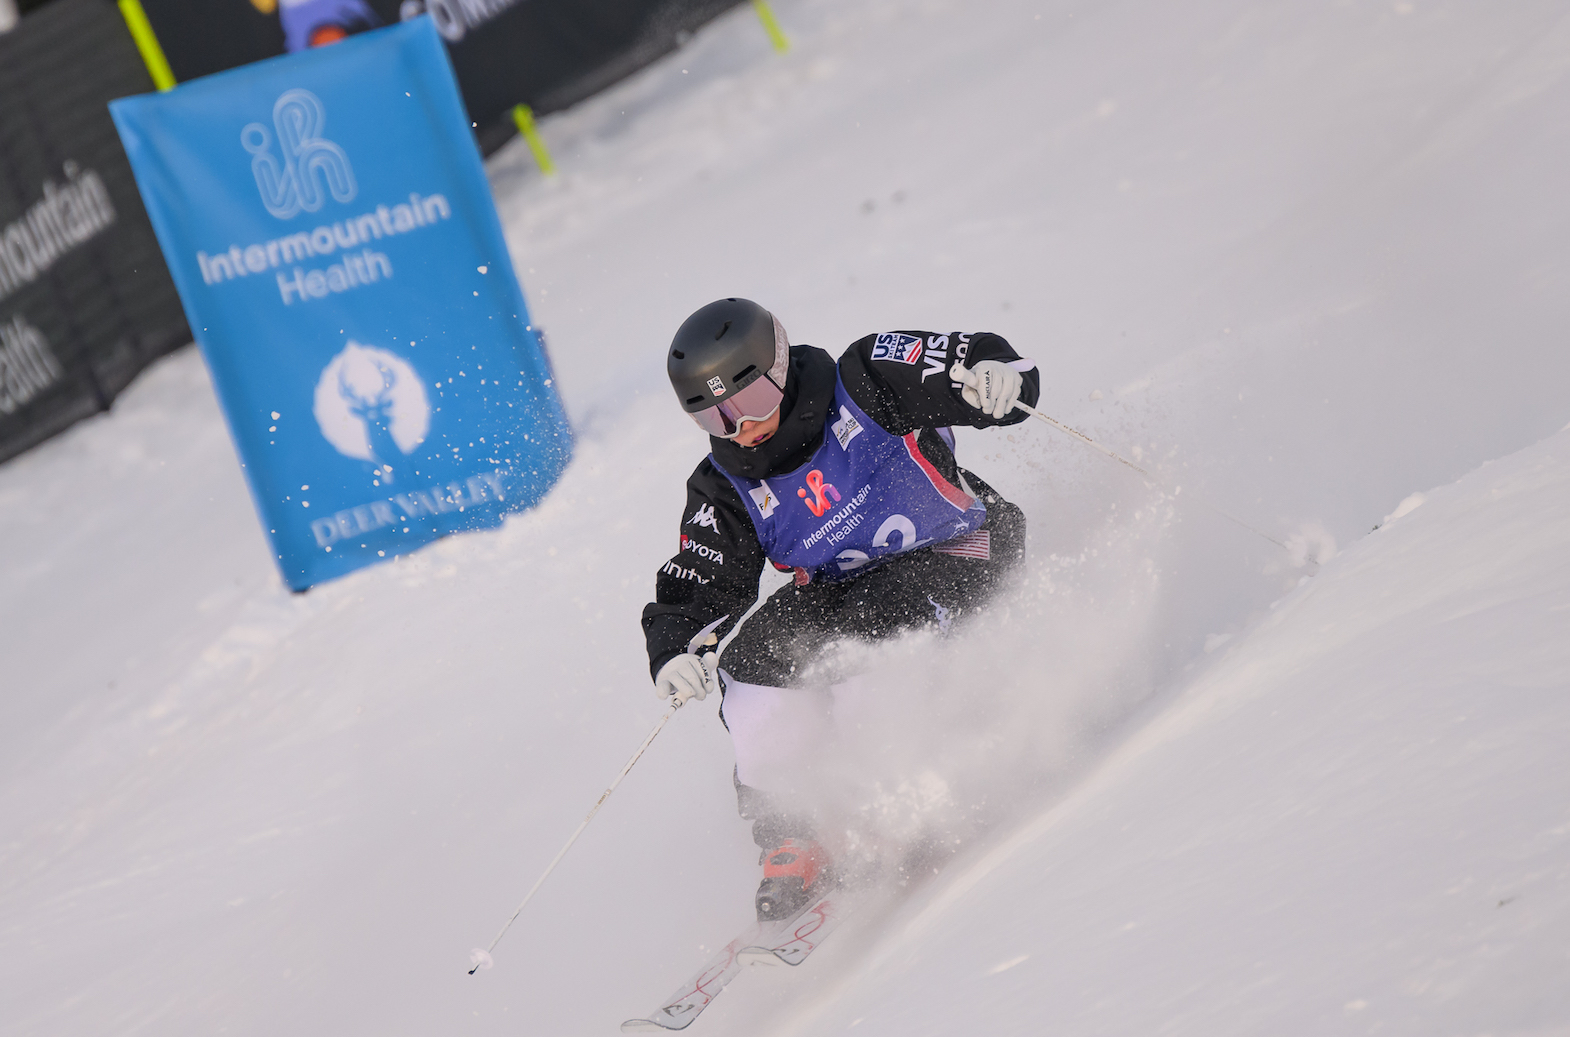 Moguls athlete competing during the World Cup